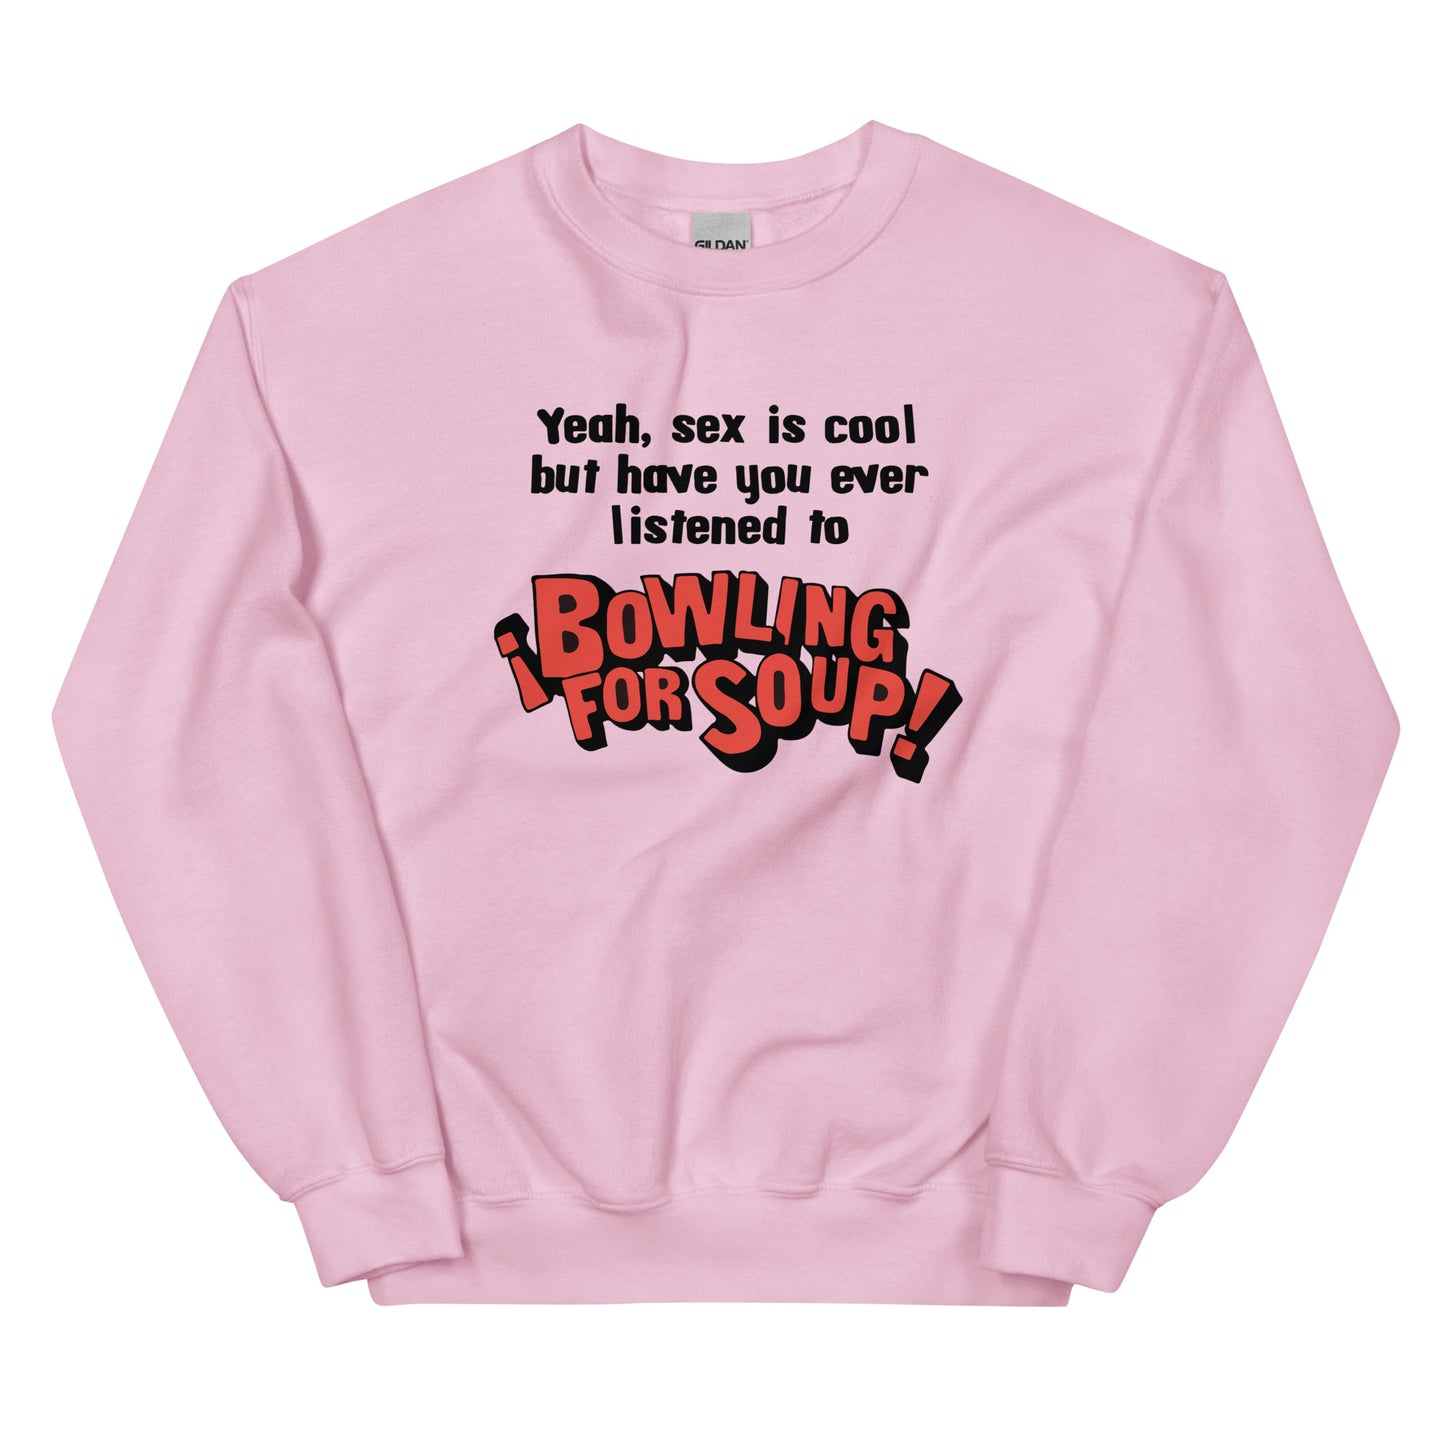 Have You Ever Listened to Bowling For Soup? Unisex Sweatshirt